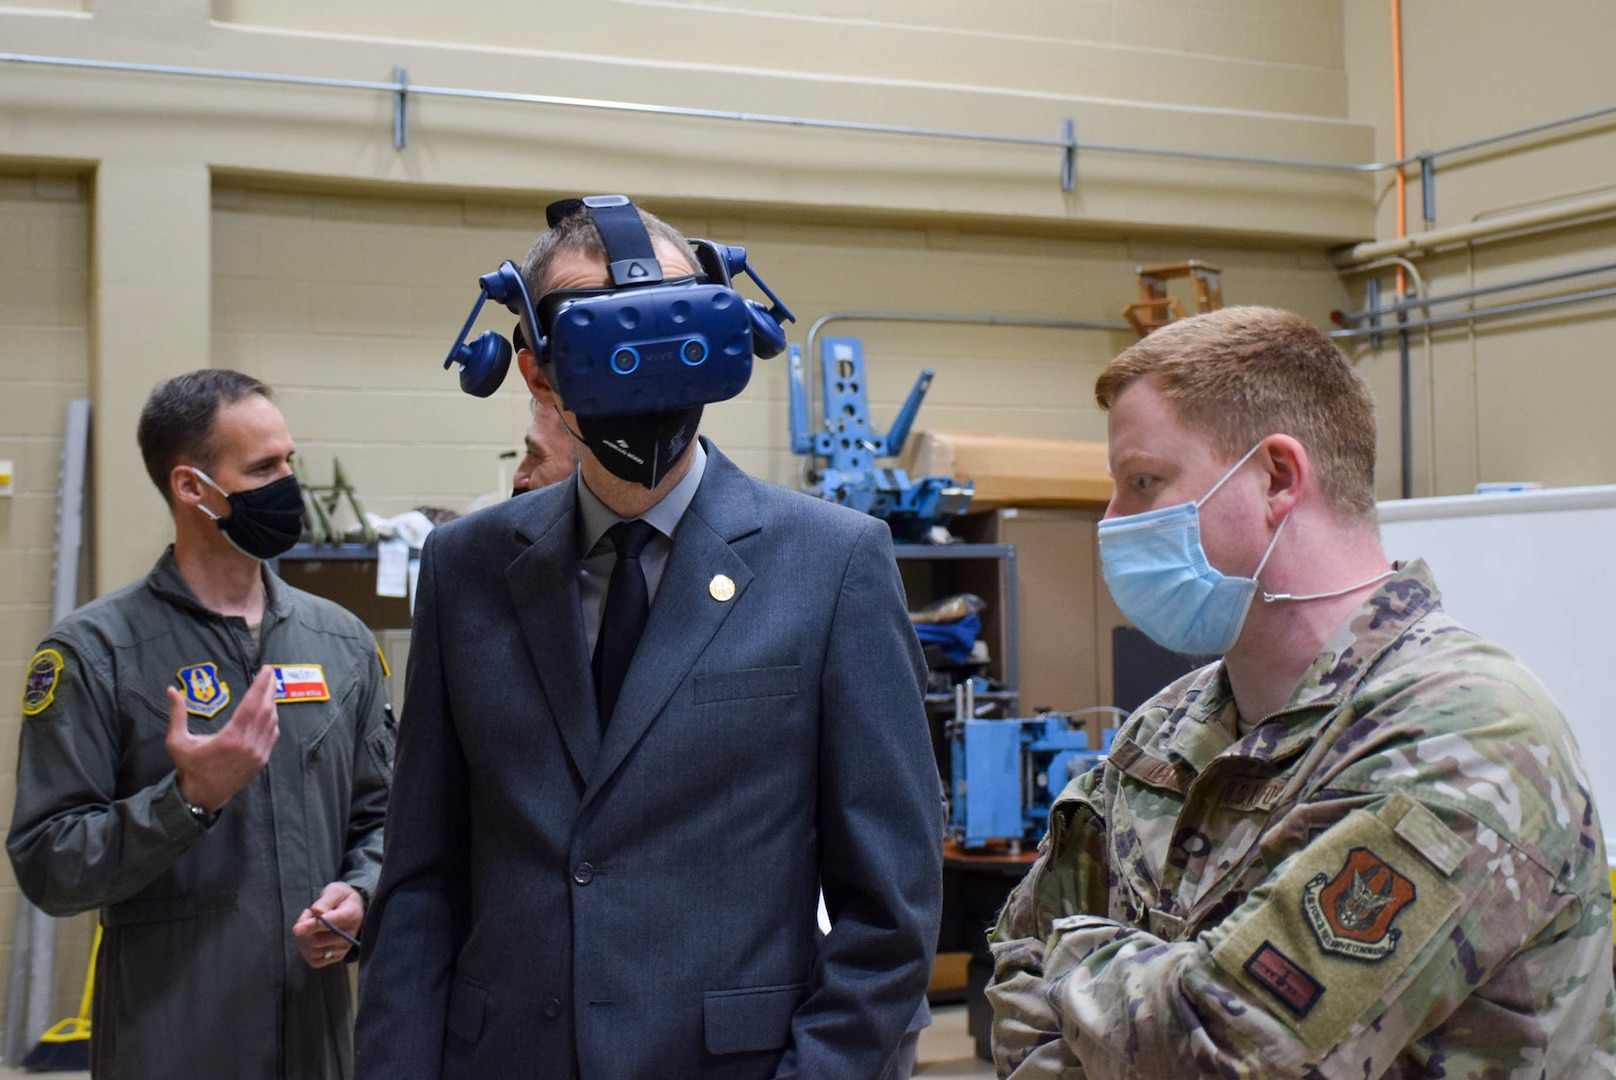 Petr Zlatohlávek, Jagello 2000 Association senior project director, tests the virtual reality headset inside the virtual reality room Jan. 25, 2022, while Maj. Paul Lentz, 733rd Training Squadron director of operations, explains the functions and capabilities of the system, at Joint Base San Antonio-Lackland, Texas. Zlatohlávek was experiencing a virtual model of the C-5M Super Galaxy through the headset. (U.S. Air Force photo by Airman Mark Colmenares)